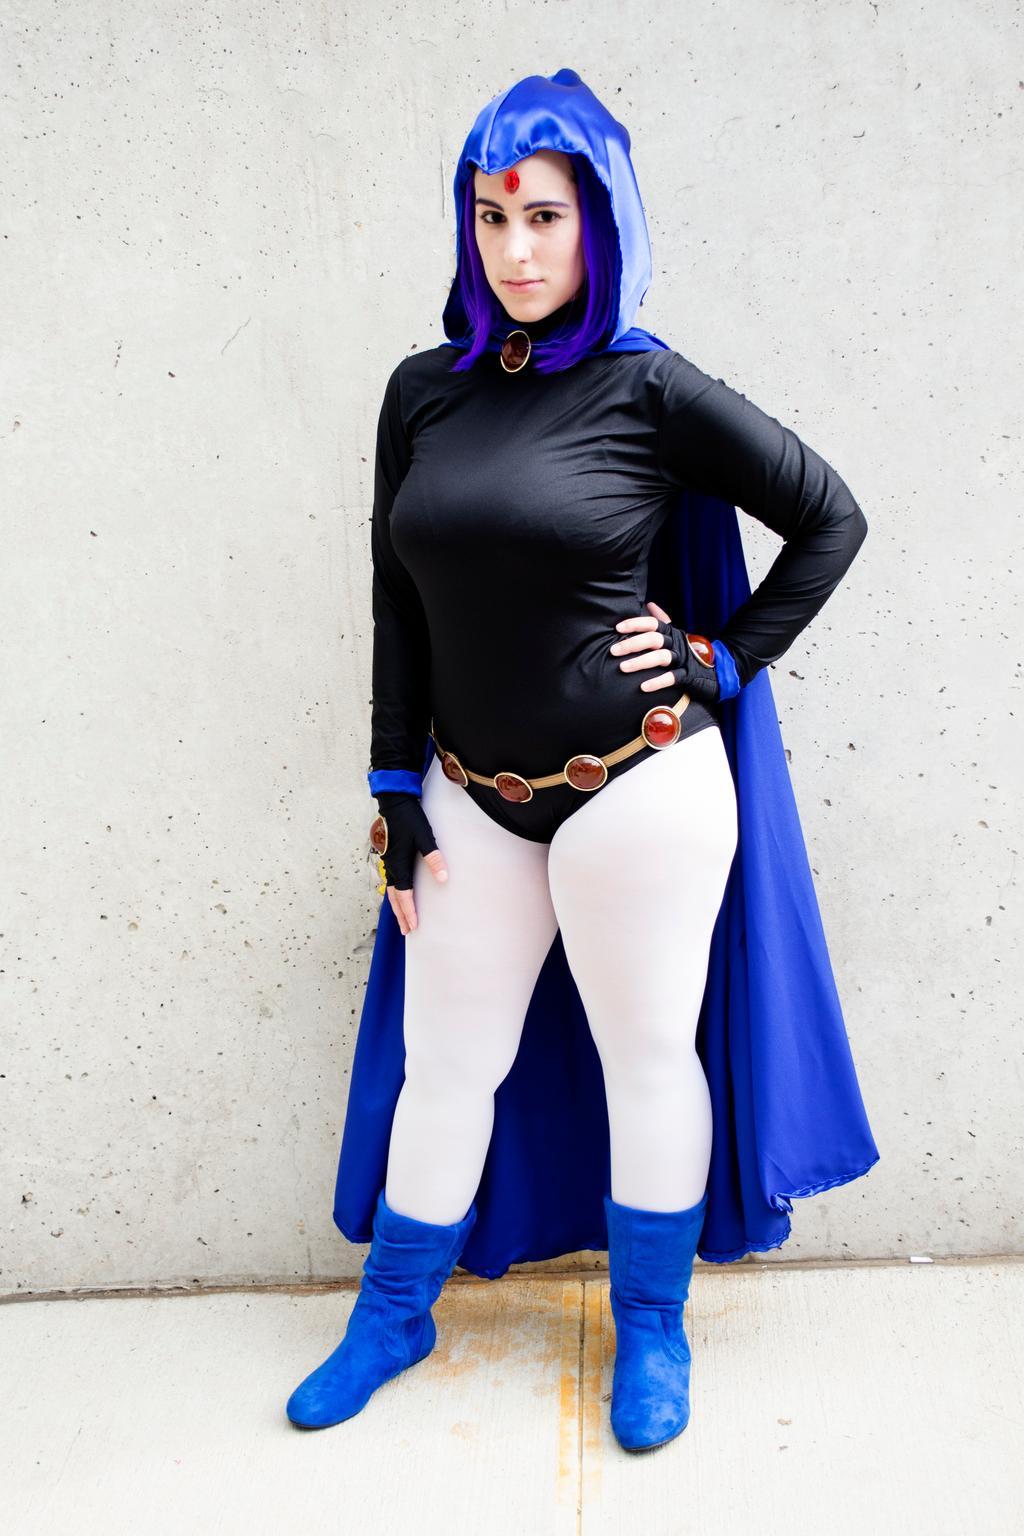 50+ Hot Pictures Of Raven From Teen Titans, DC Comics. 7